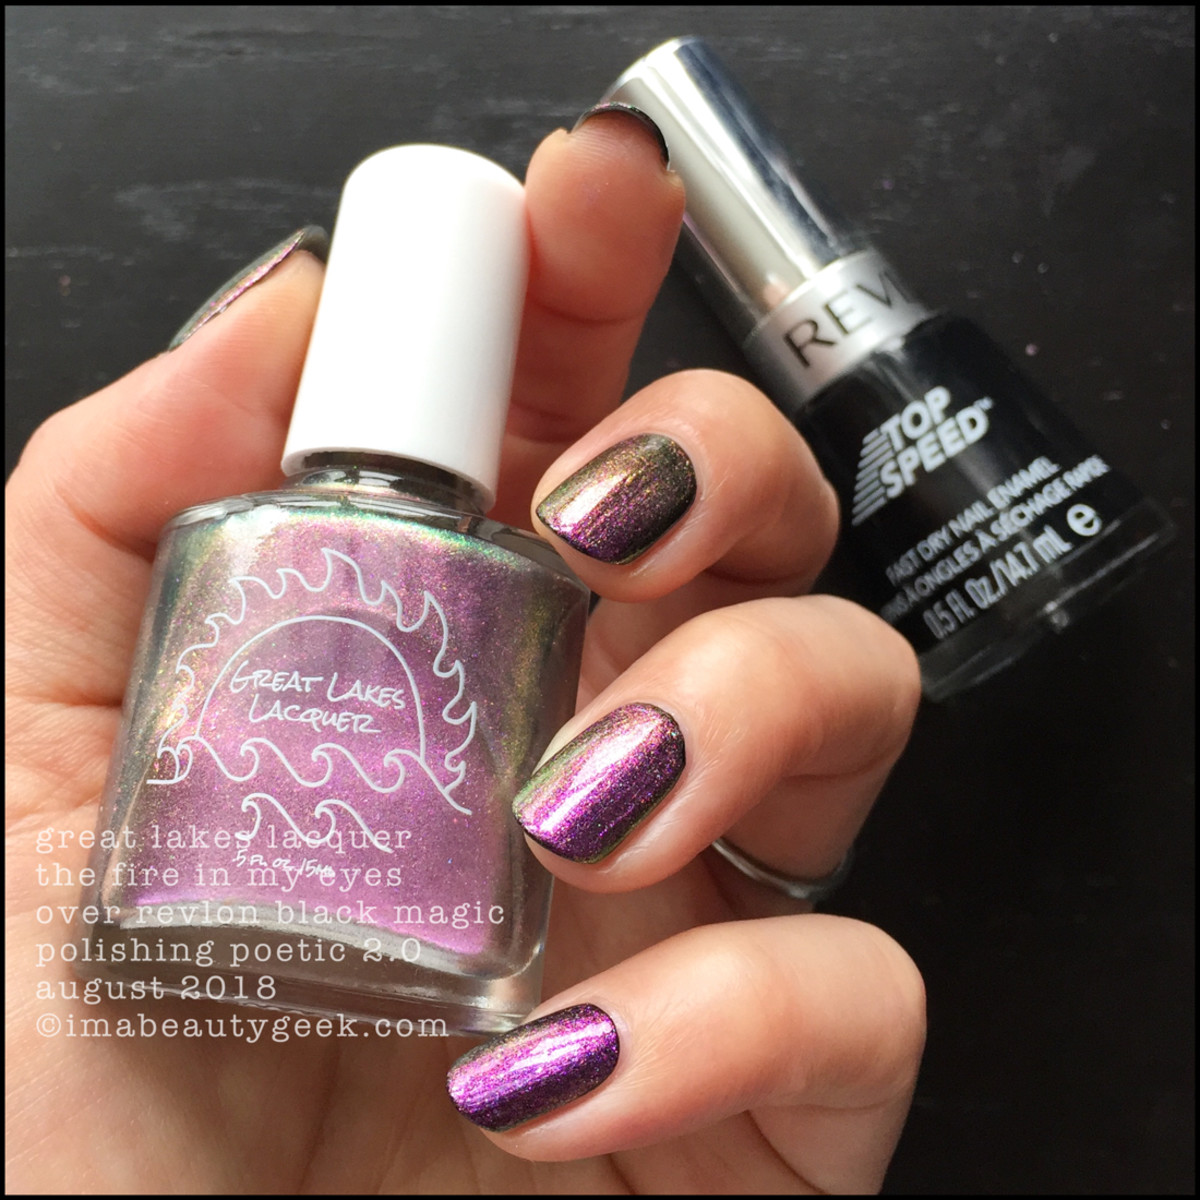 Great Lakes Lacquer The Fire In My Eyes over black 3 _ Great Lakes Lacquer Polishing Poetic 2.0 Swatches & Review